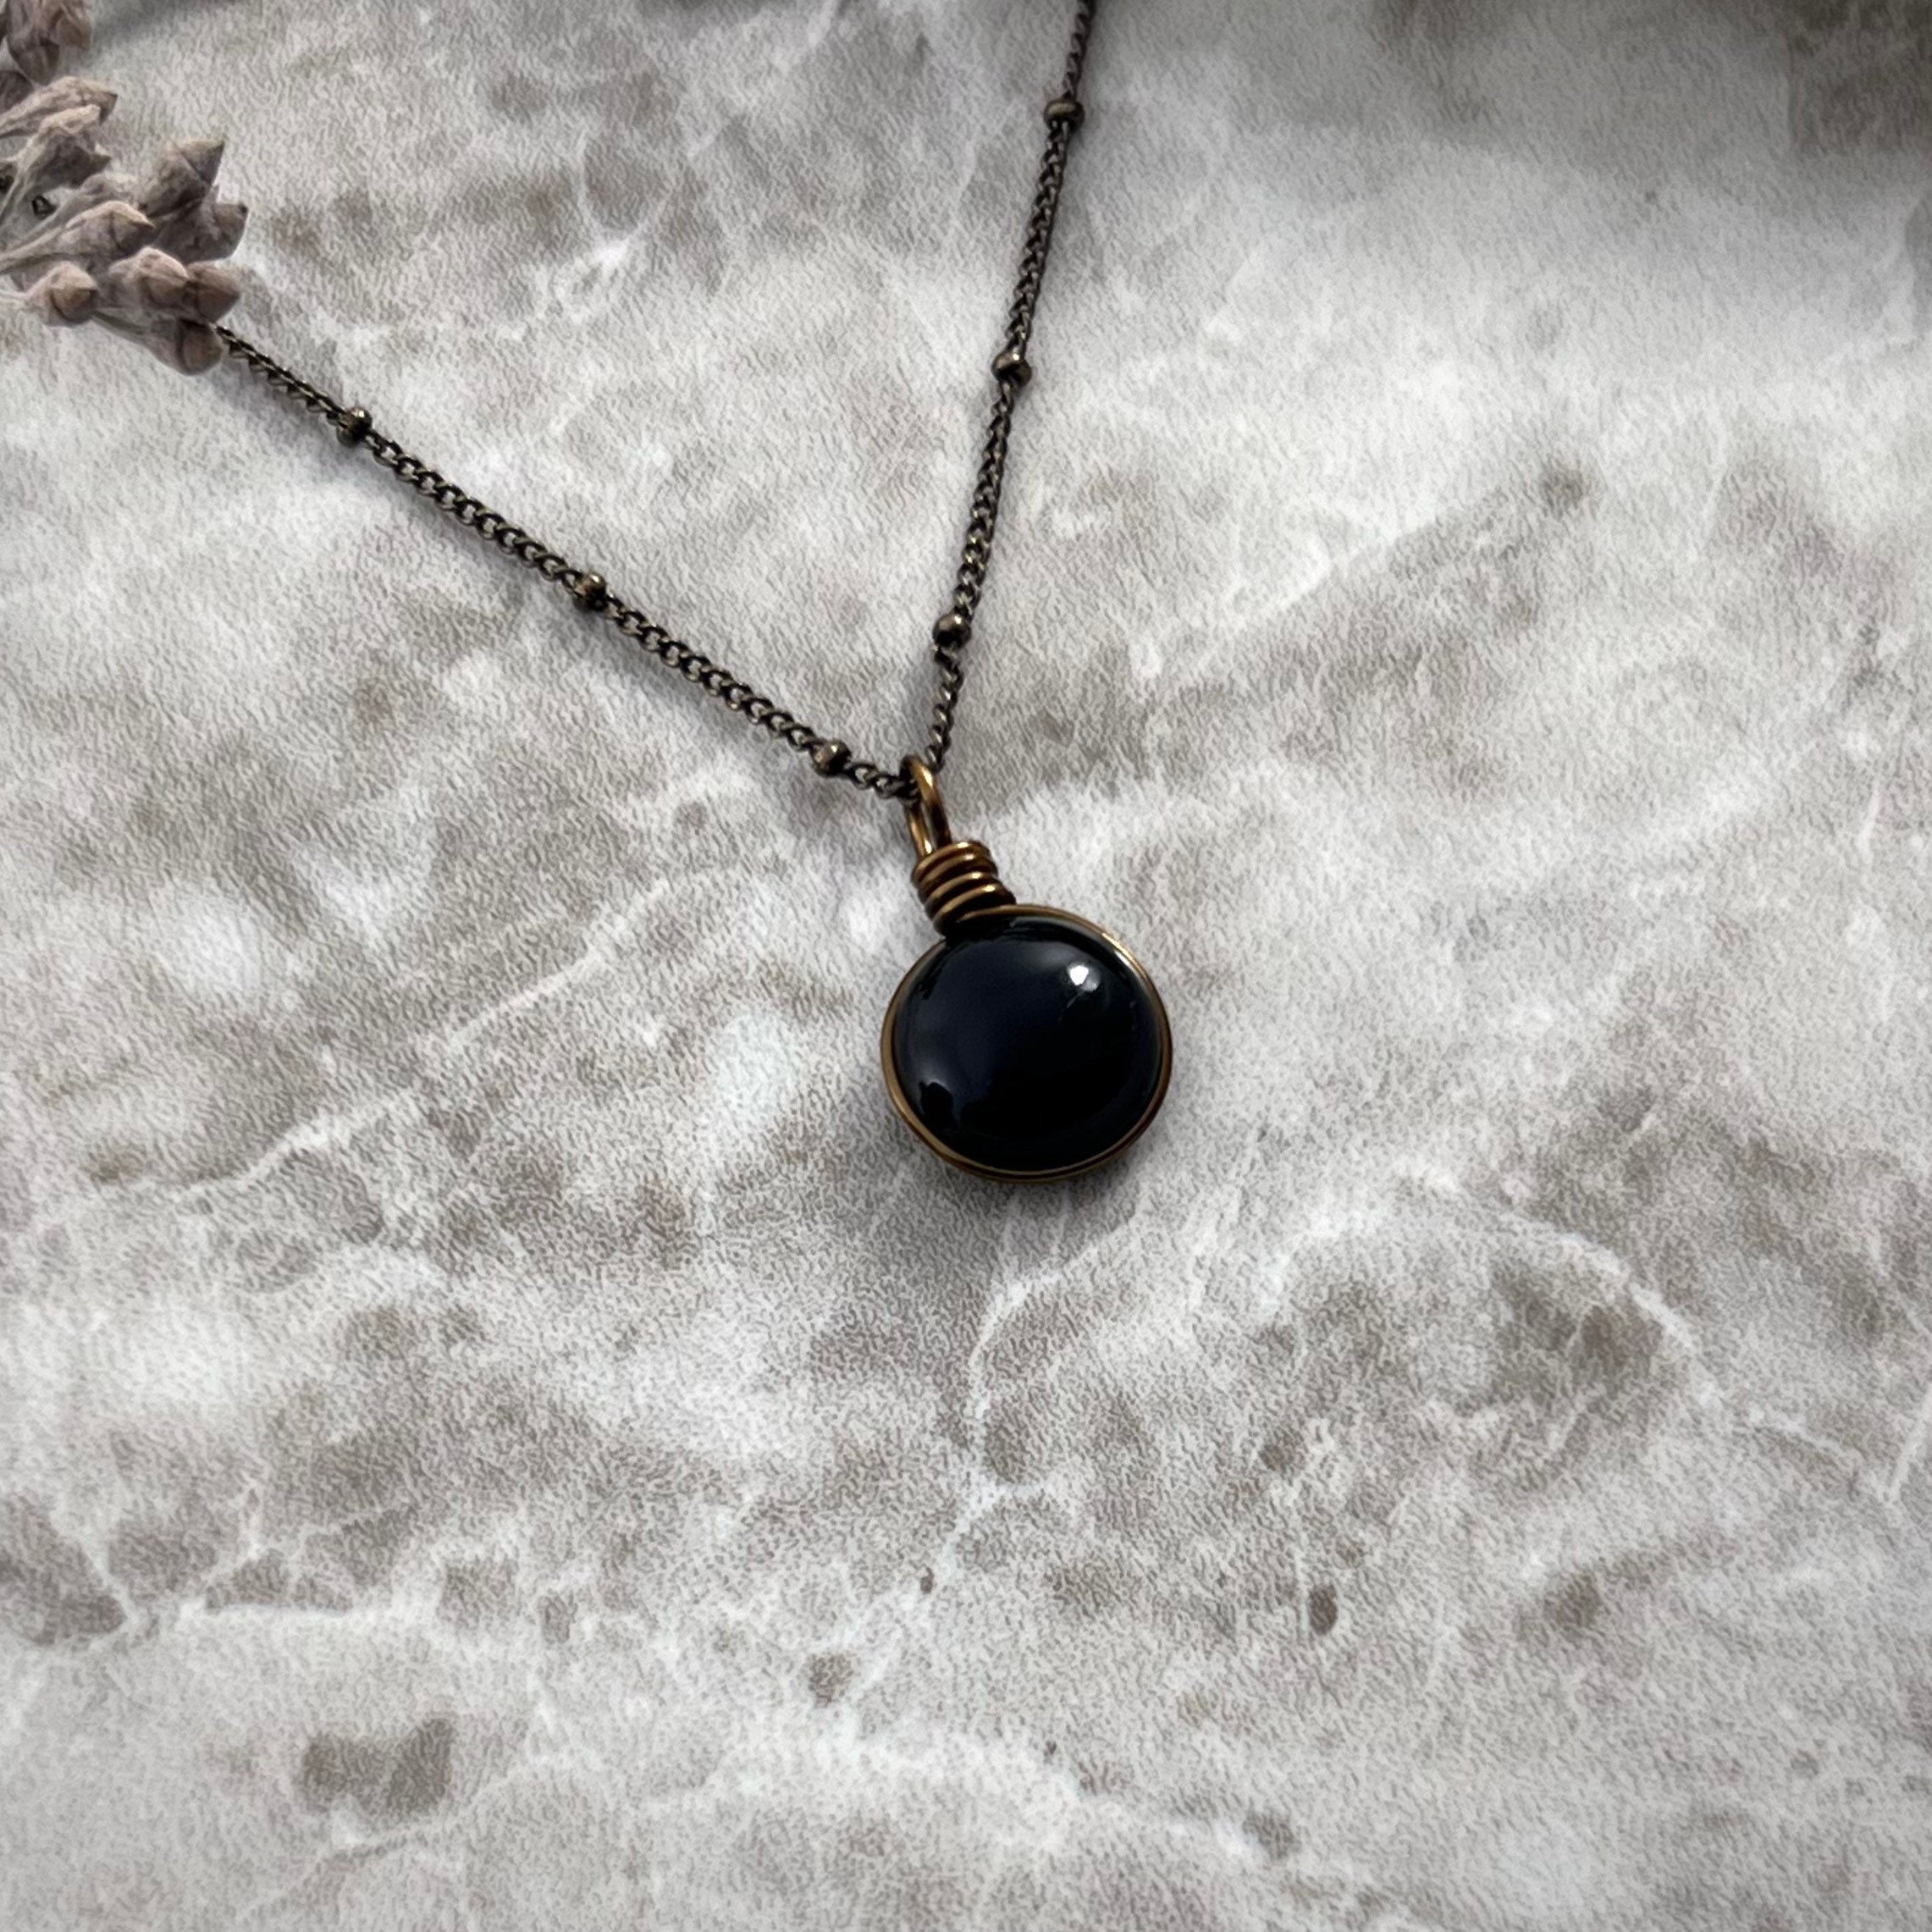 ye ye 🥝 #jewellery #necklace #emo #goth #cool #edgy #silver #layers # aesthetic #dark